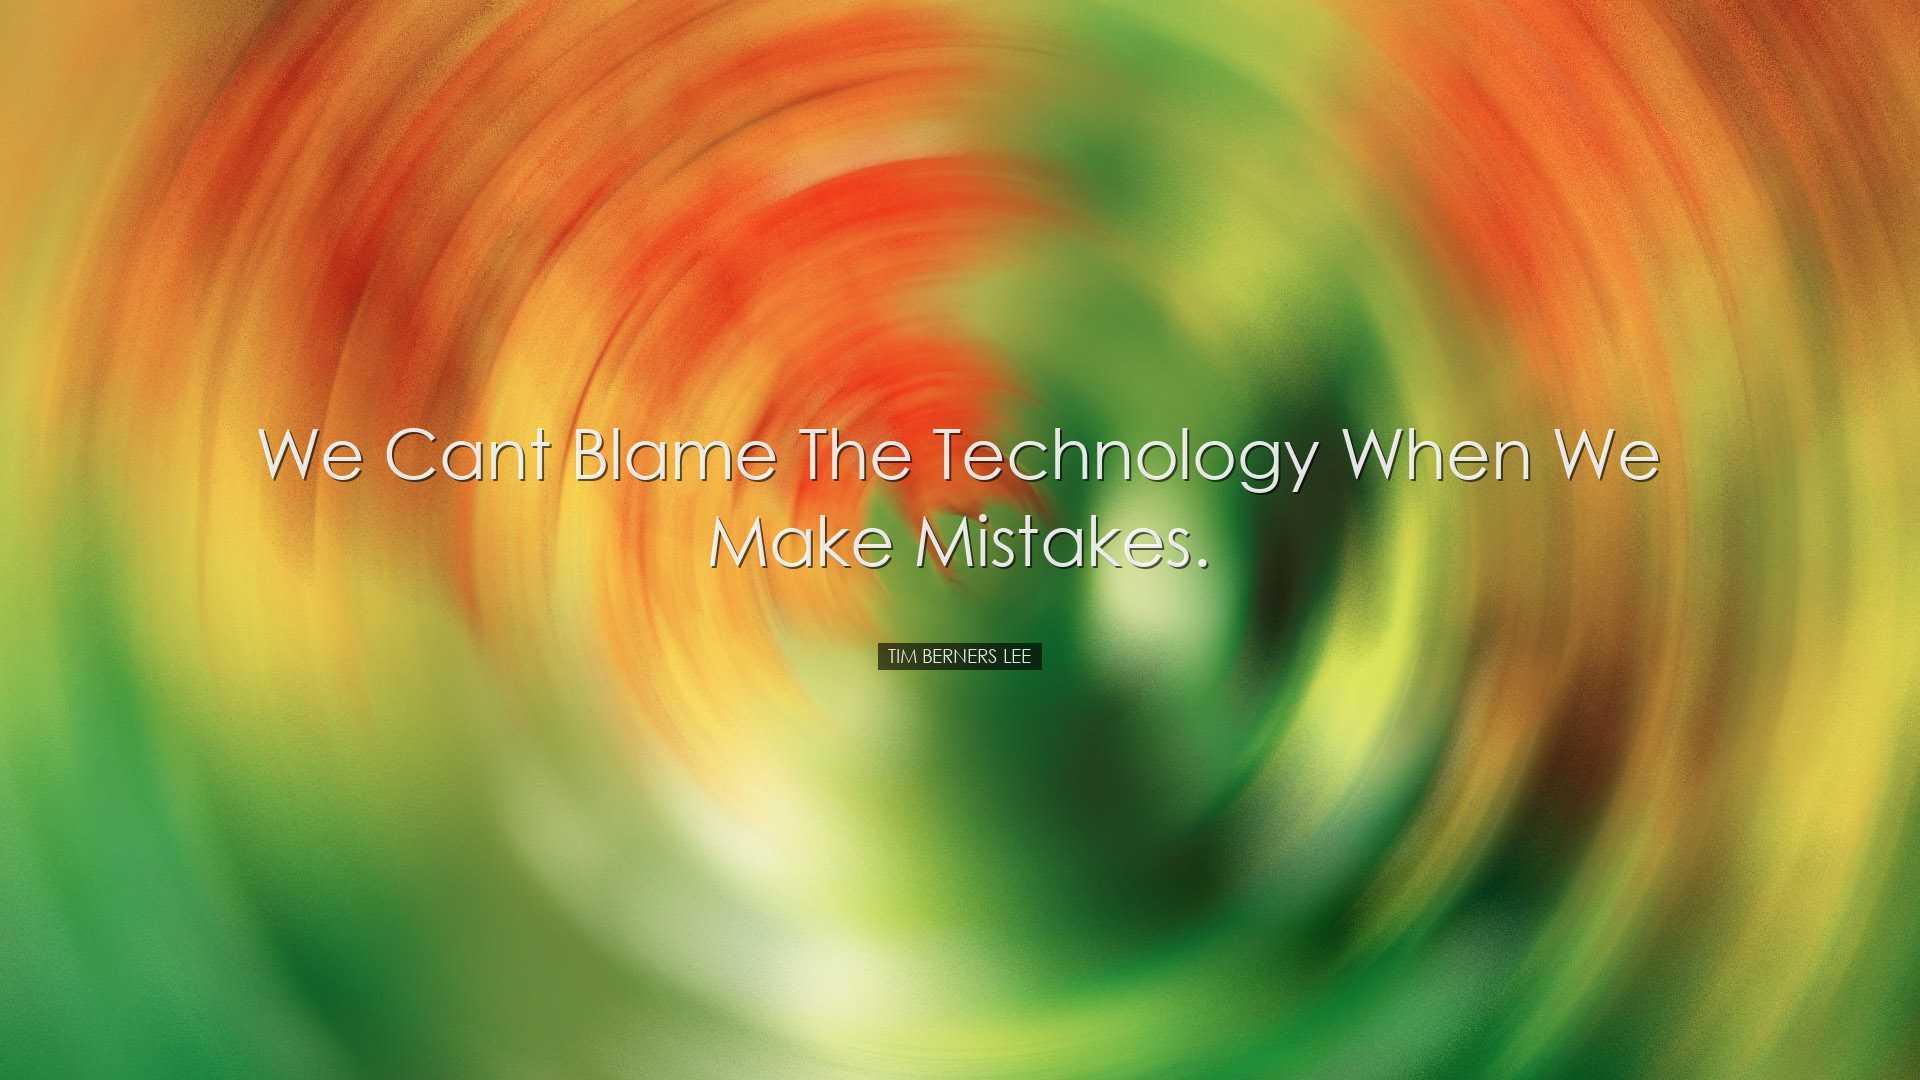 We cant blame the technology when we make mistakes. - Tim Berners